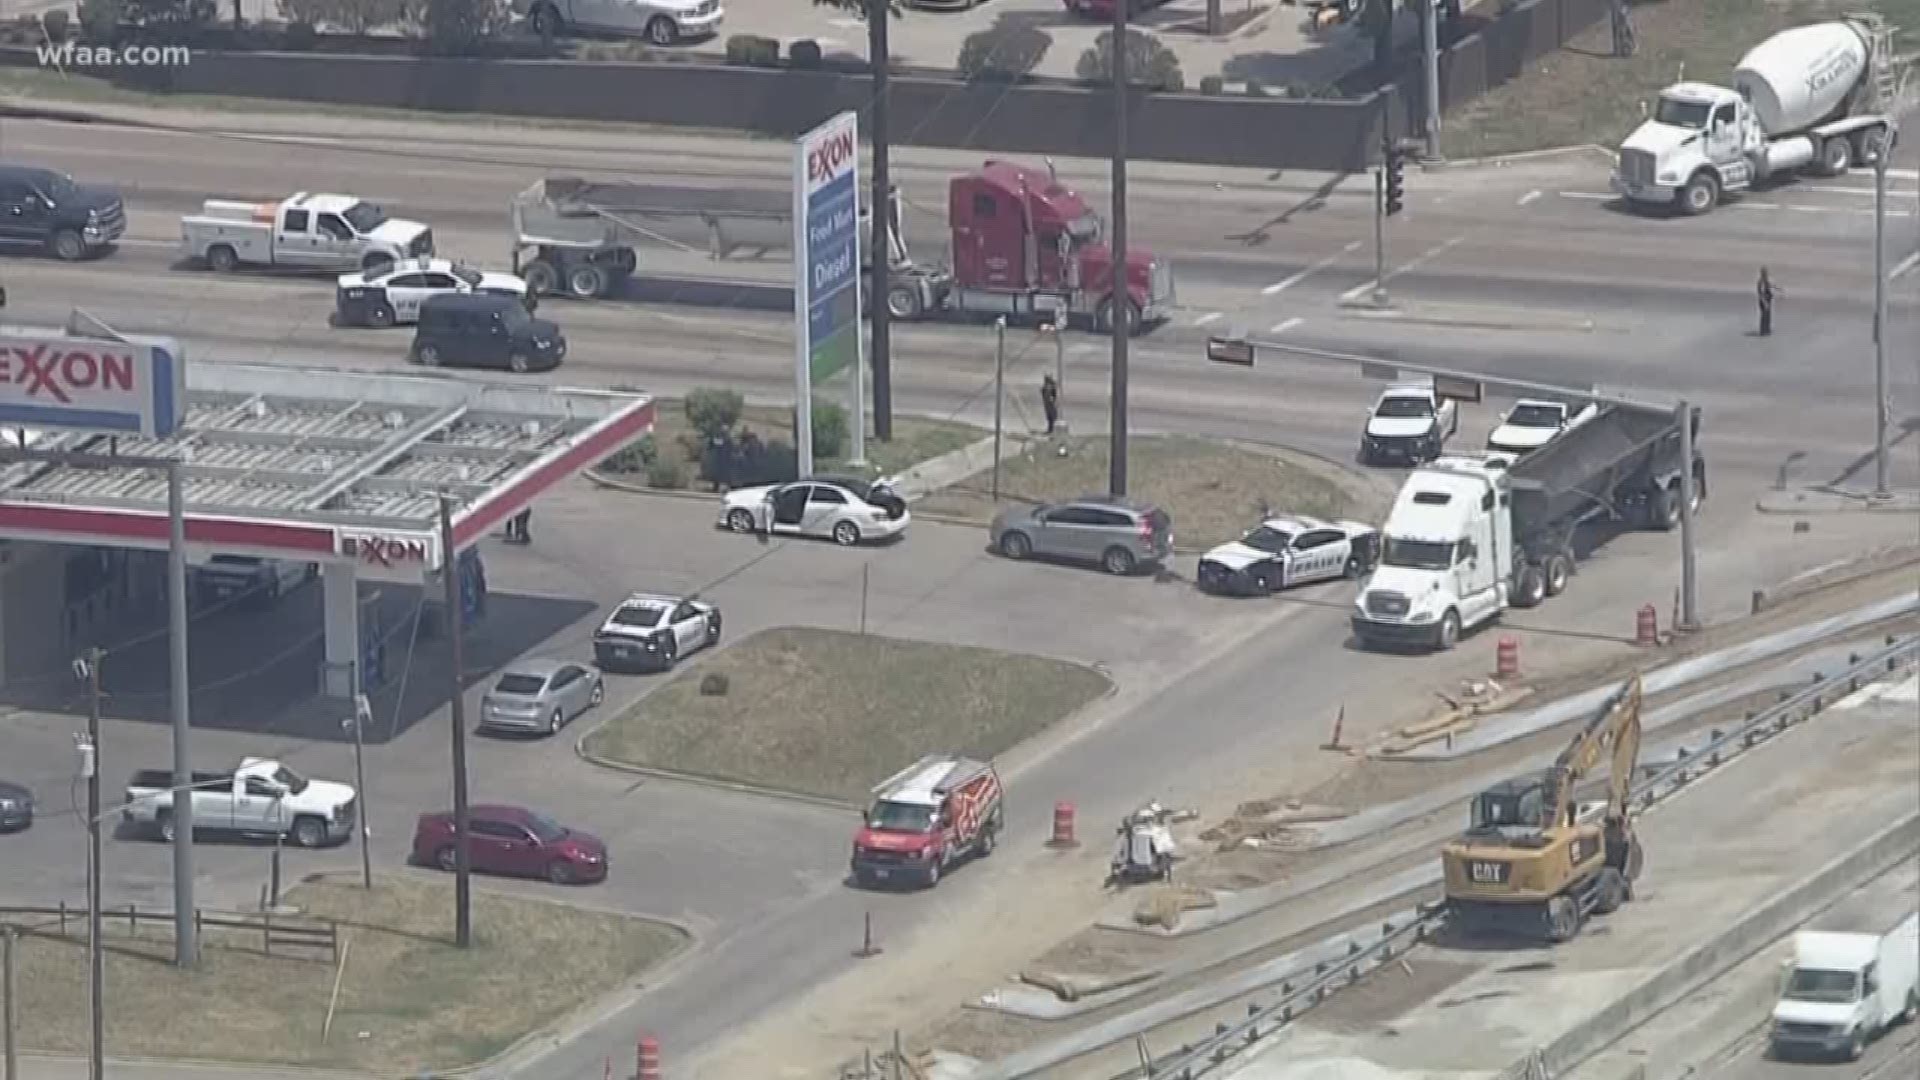 They suffered non-life threatening injuries in a shooting in northwest Dallas on Tuesday afternoon.